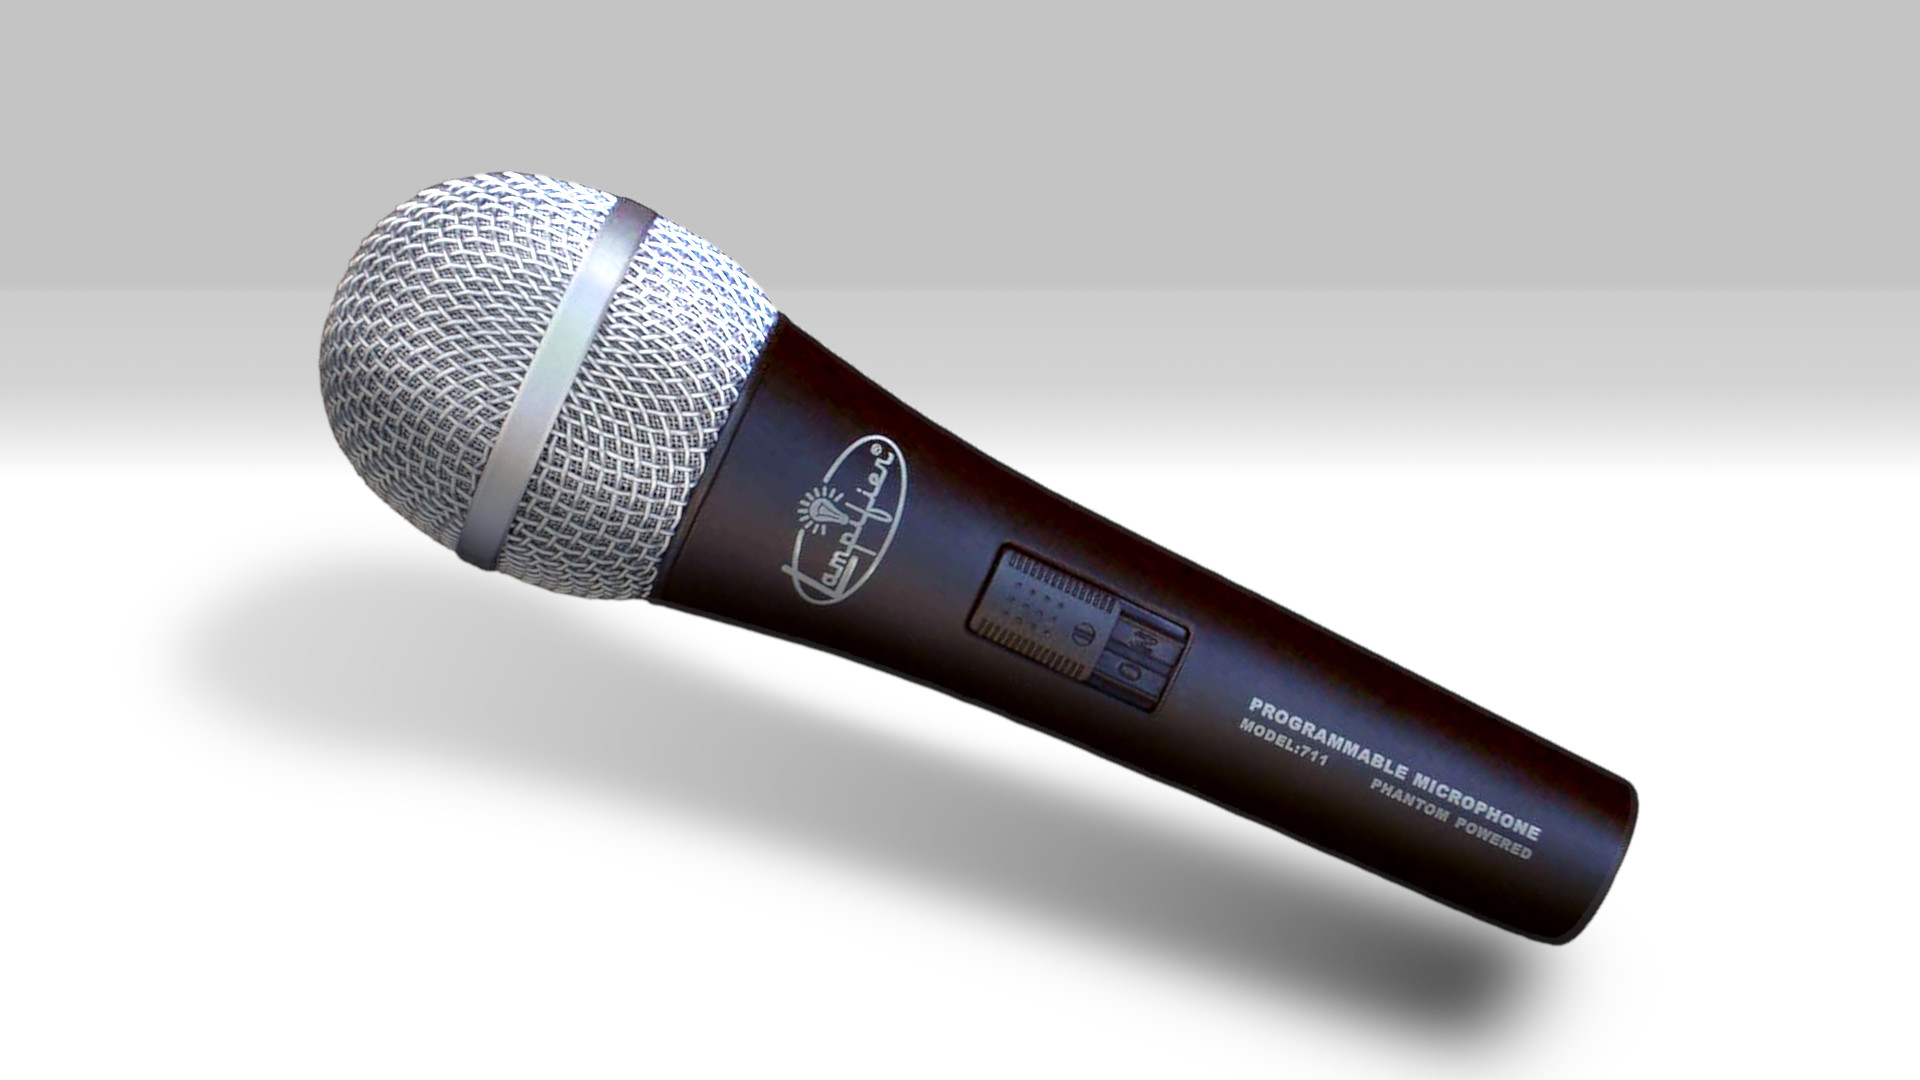 Image of Lampifier Programmable Microphone Model 711